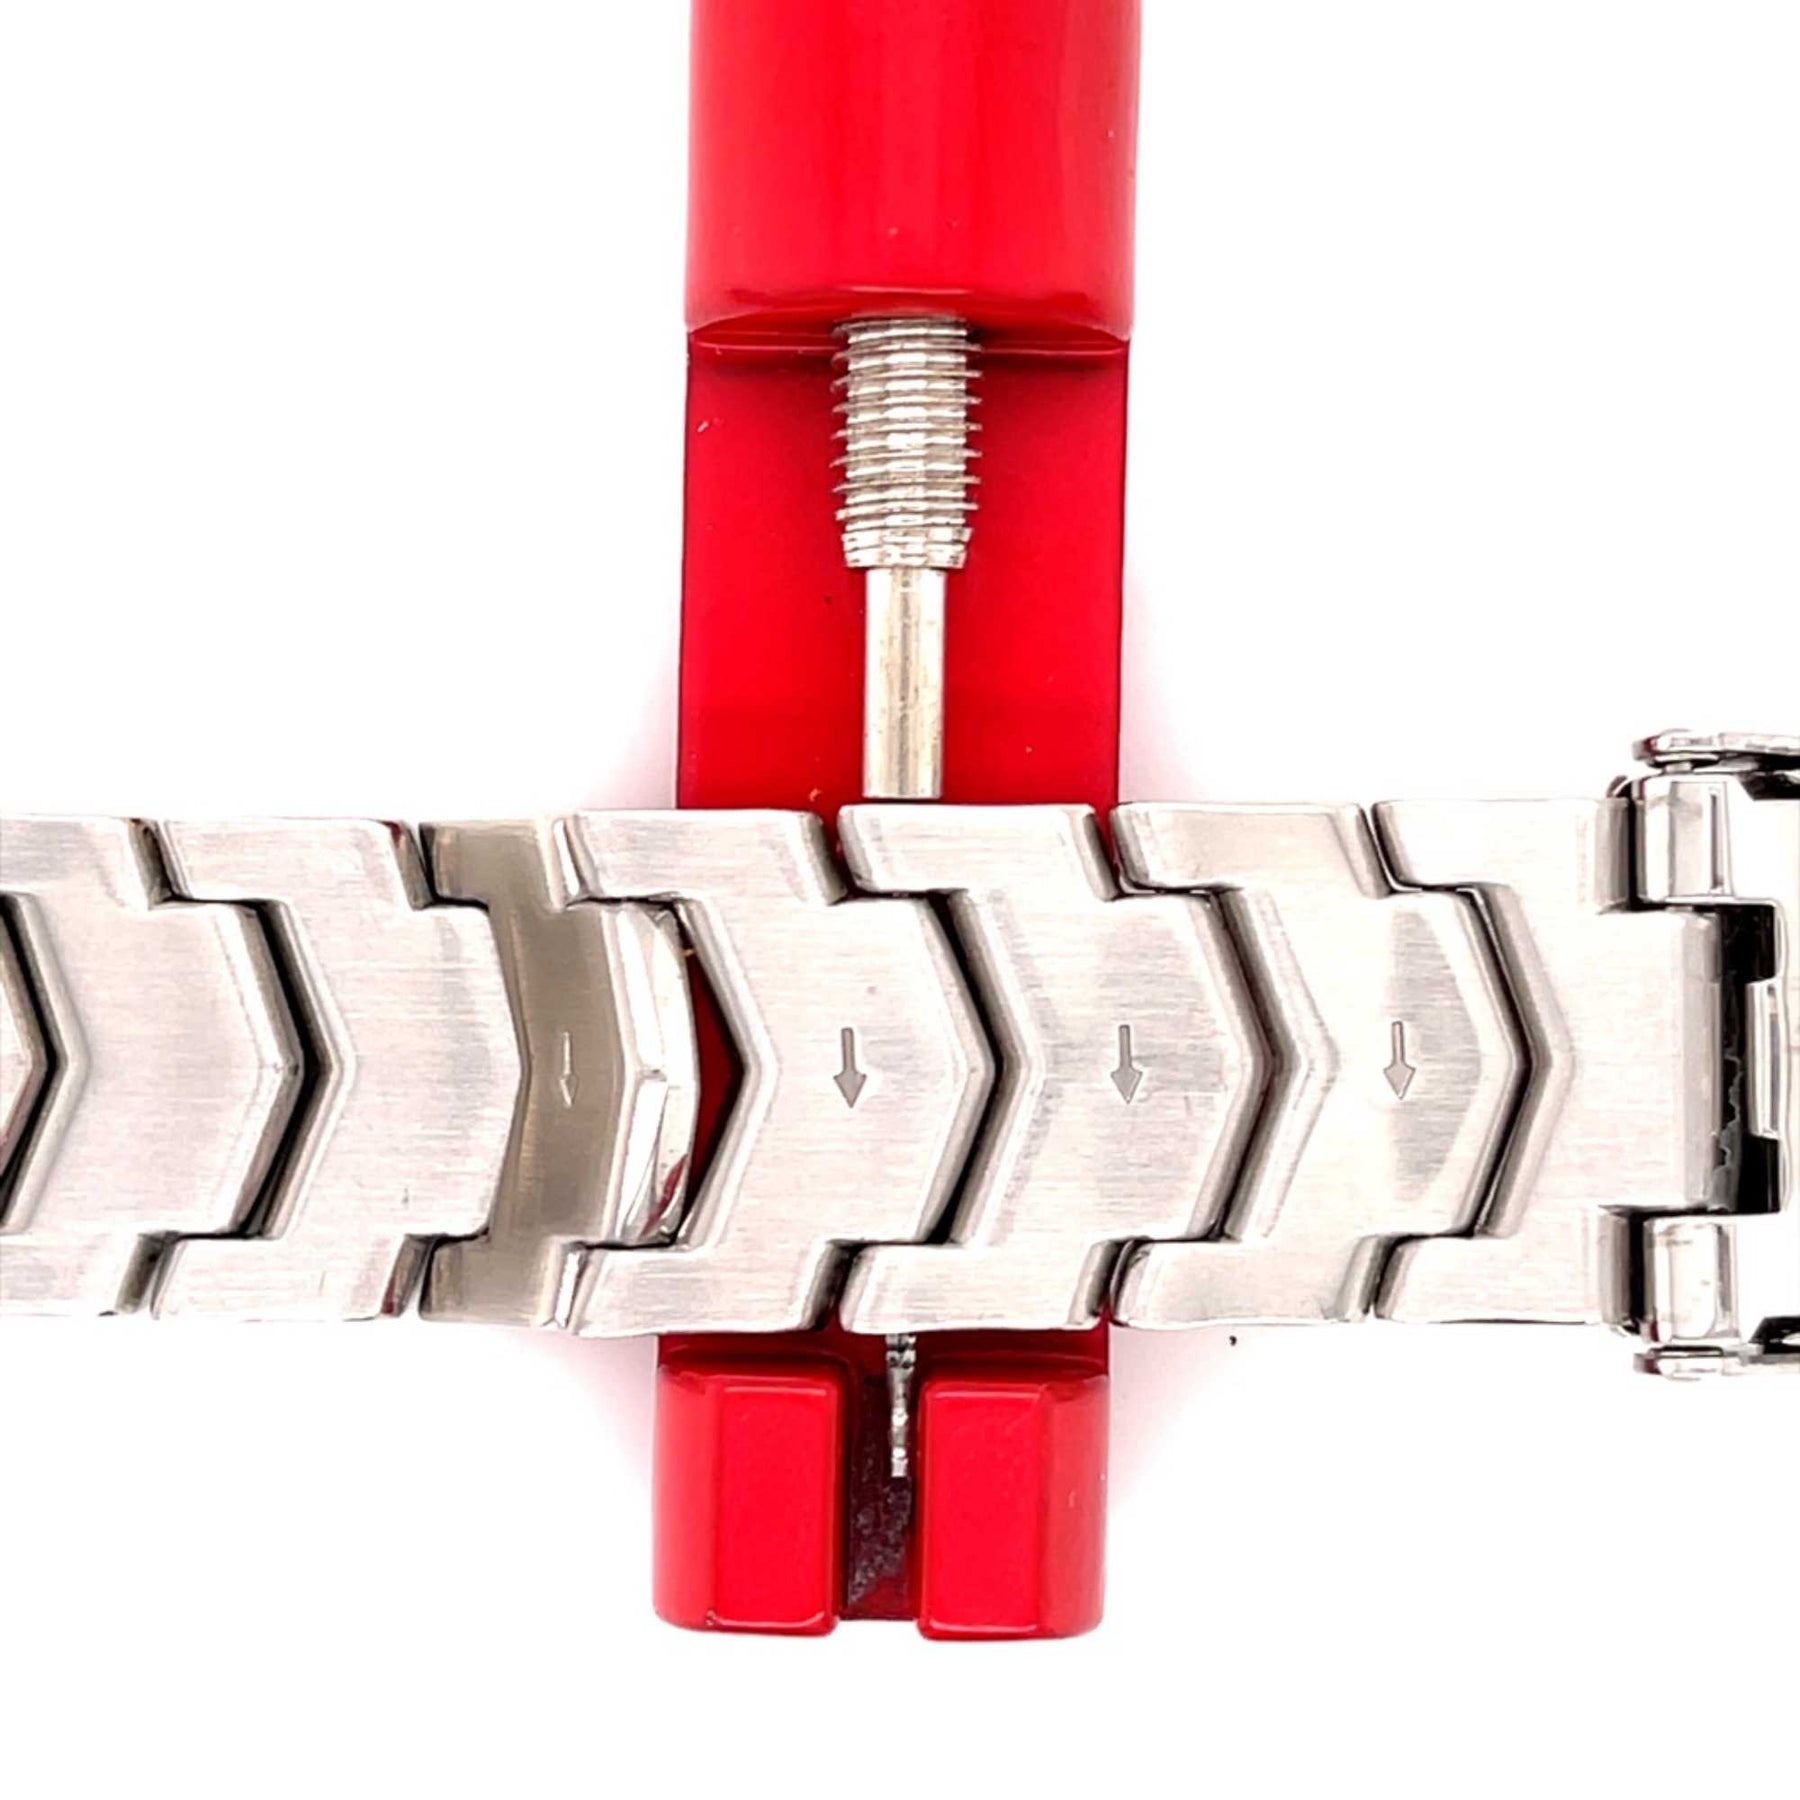 Watch Band Link Removal Tool - The Abingdon Co.